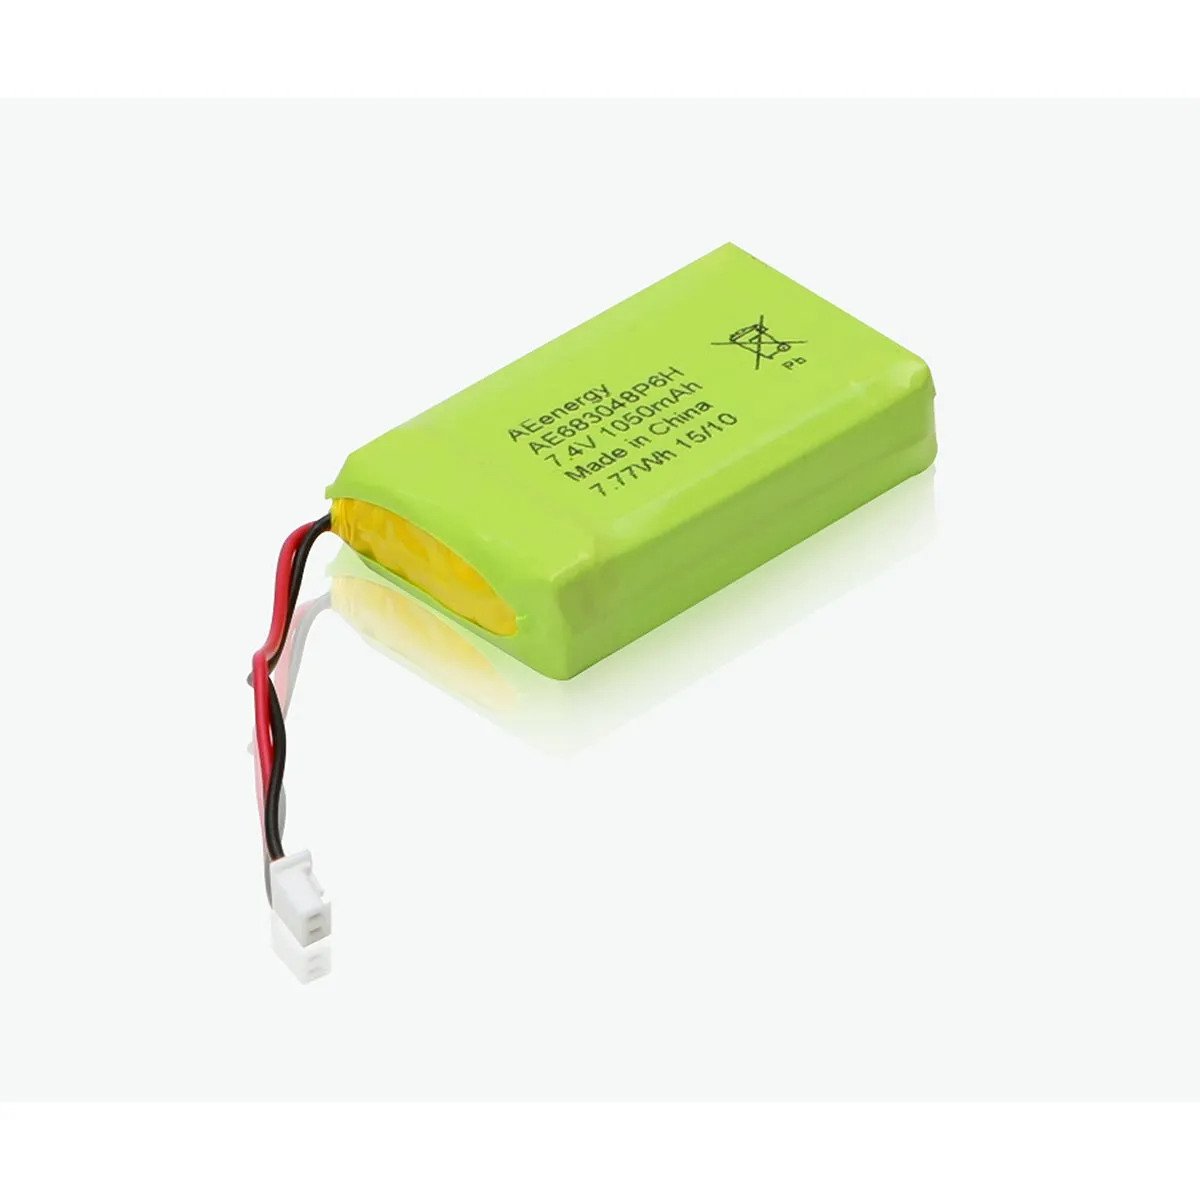 Dogtra Replacement Battery Green / Yellow BP74T Actual